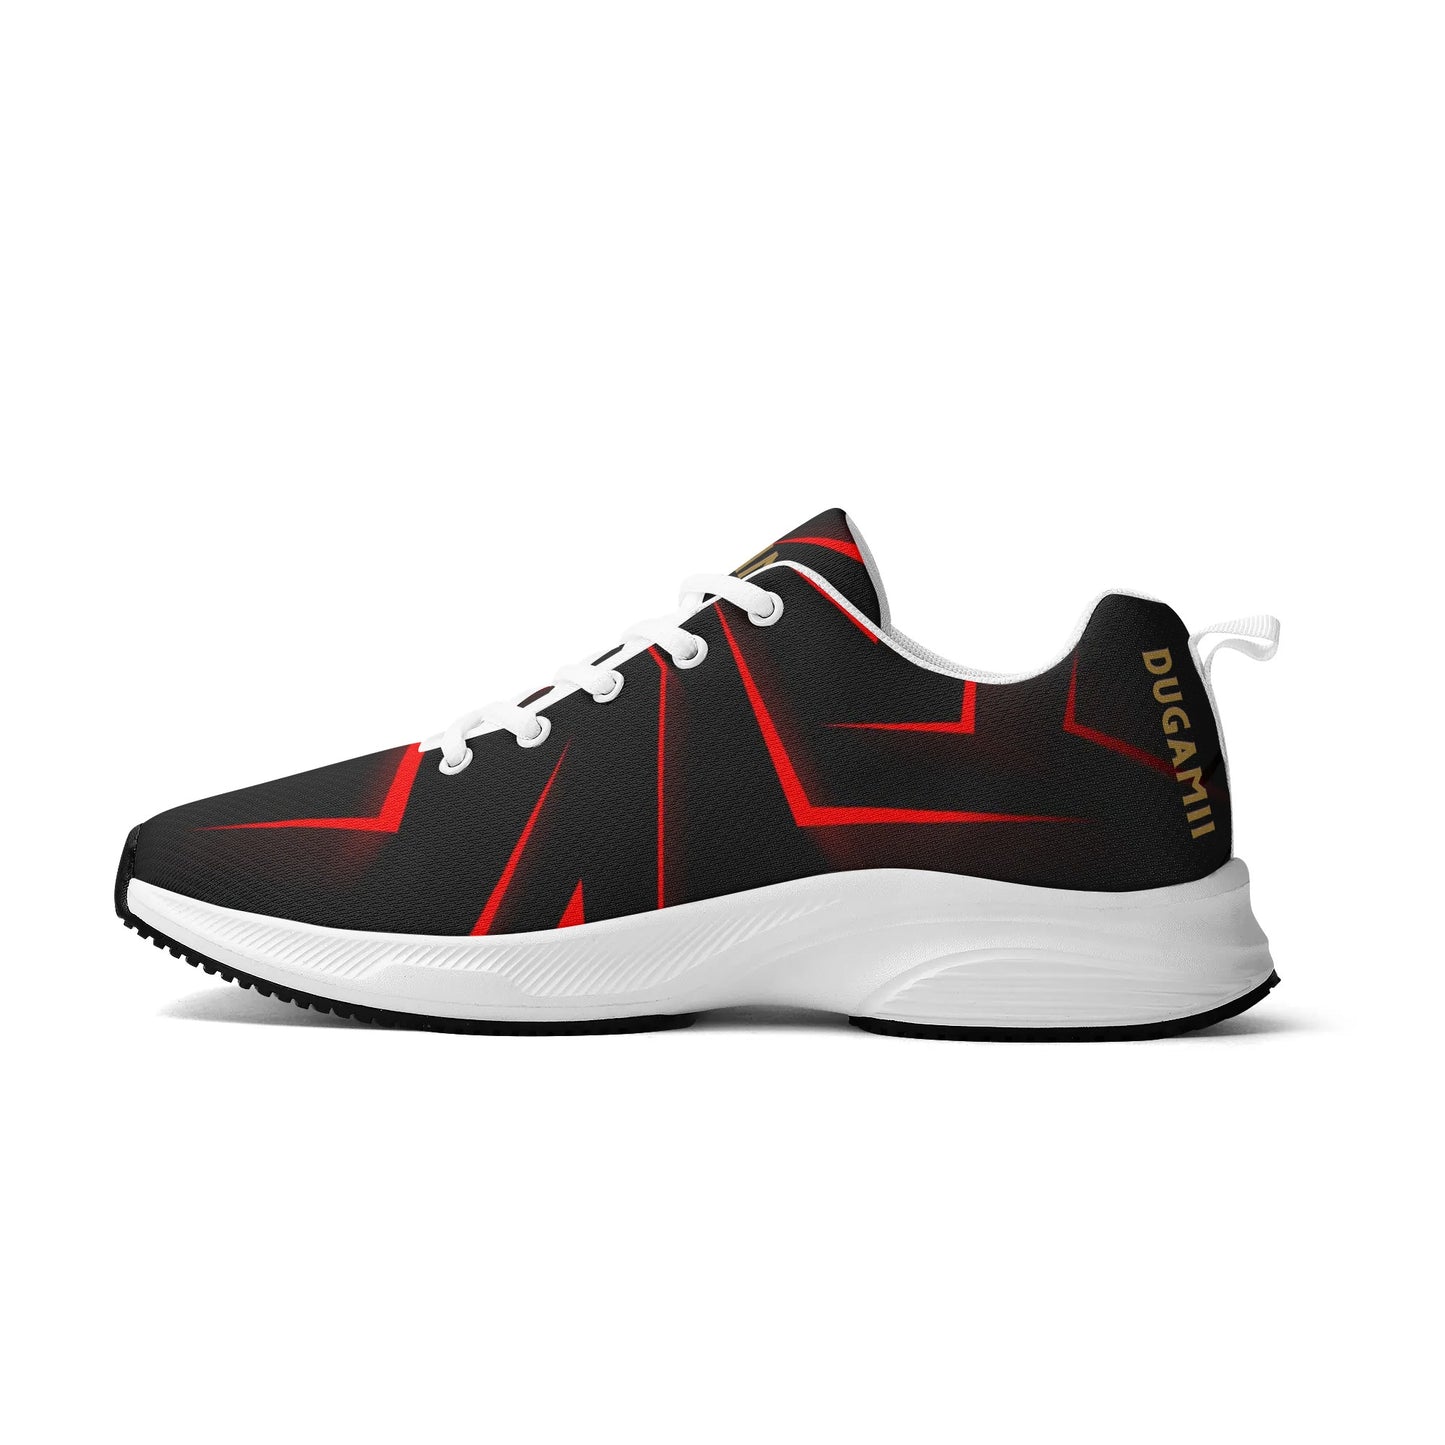 DuGamii Mens Vamped Up Black And Red Sneakers